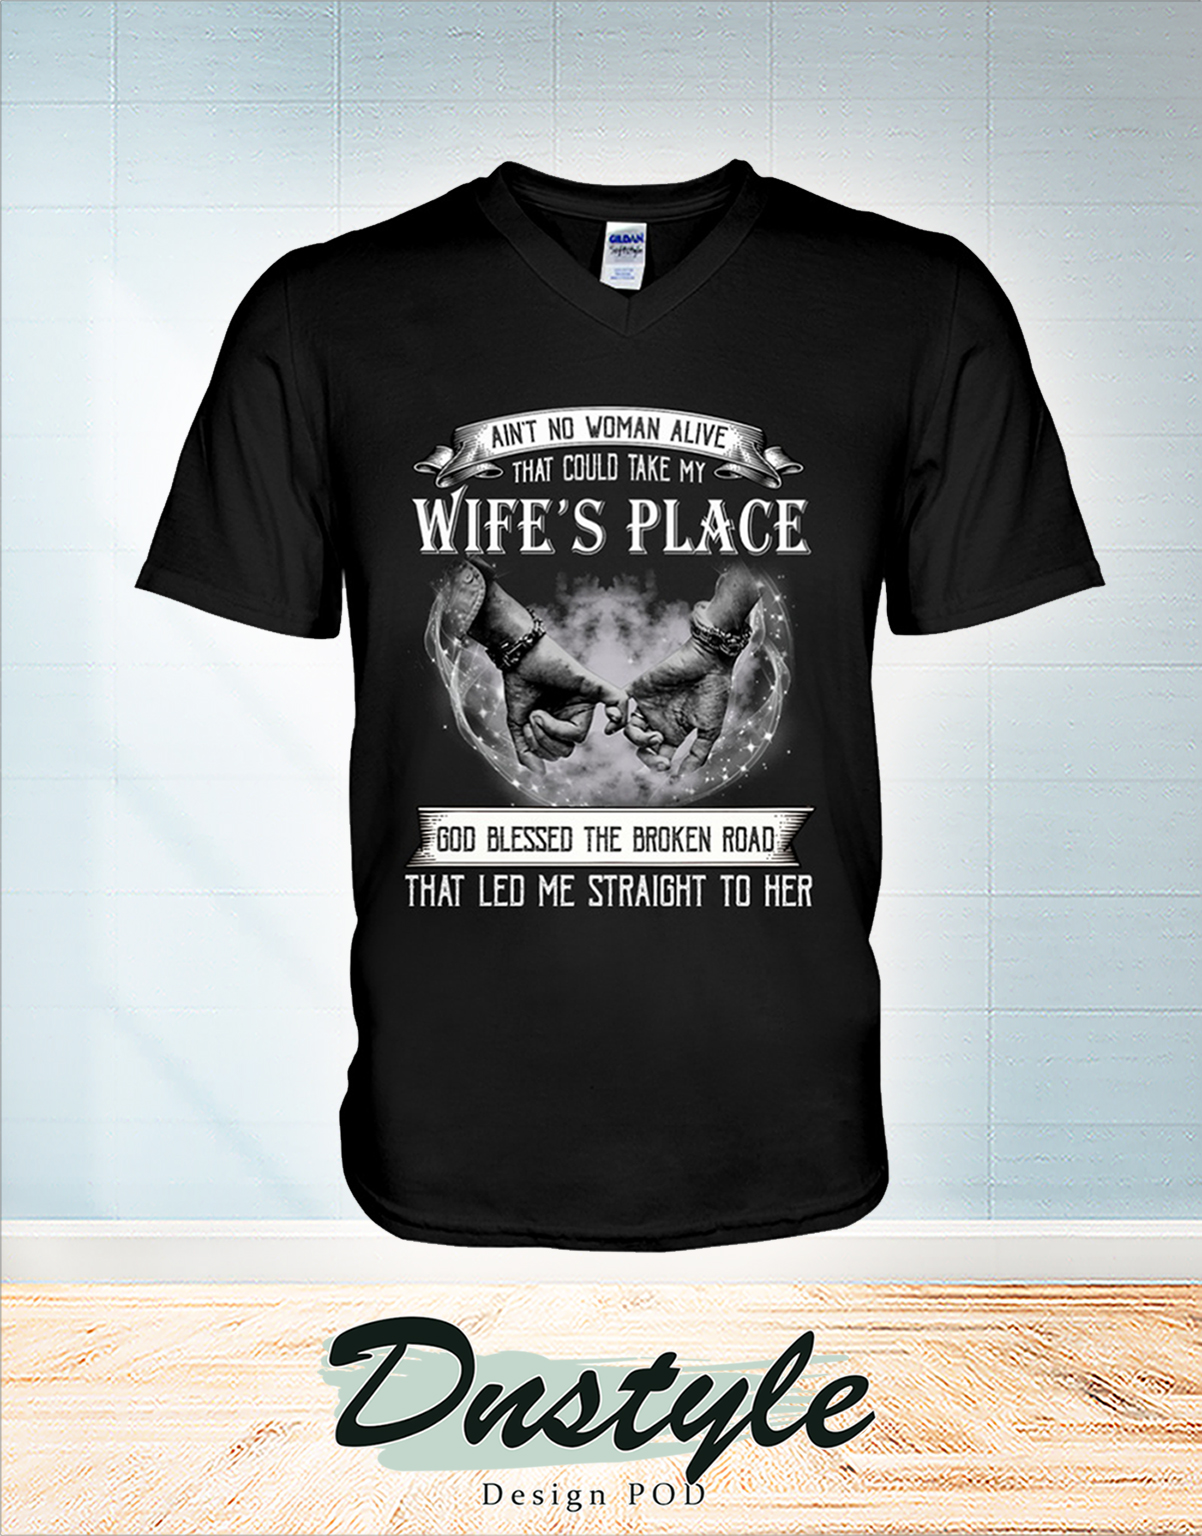 Ain't no man alive that could take my wife's place v-neck